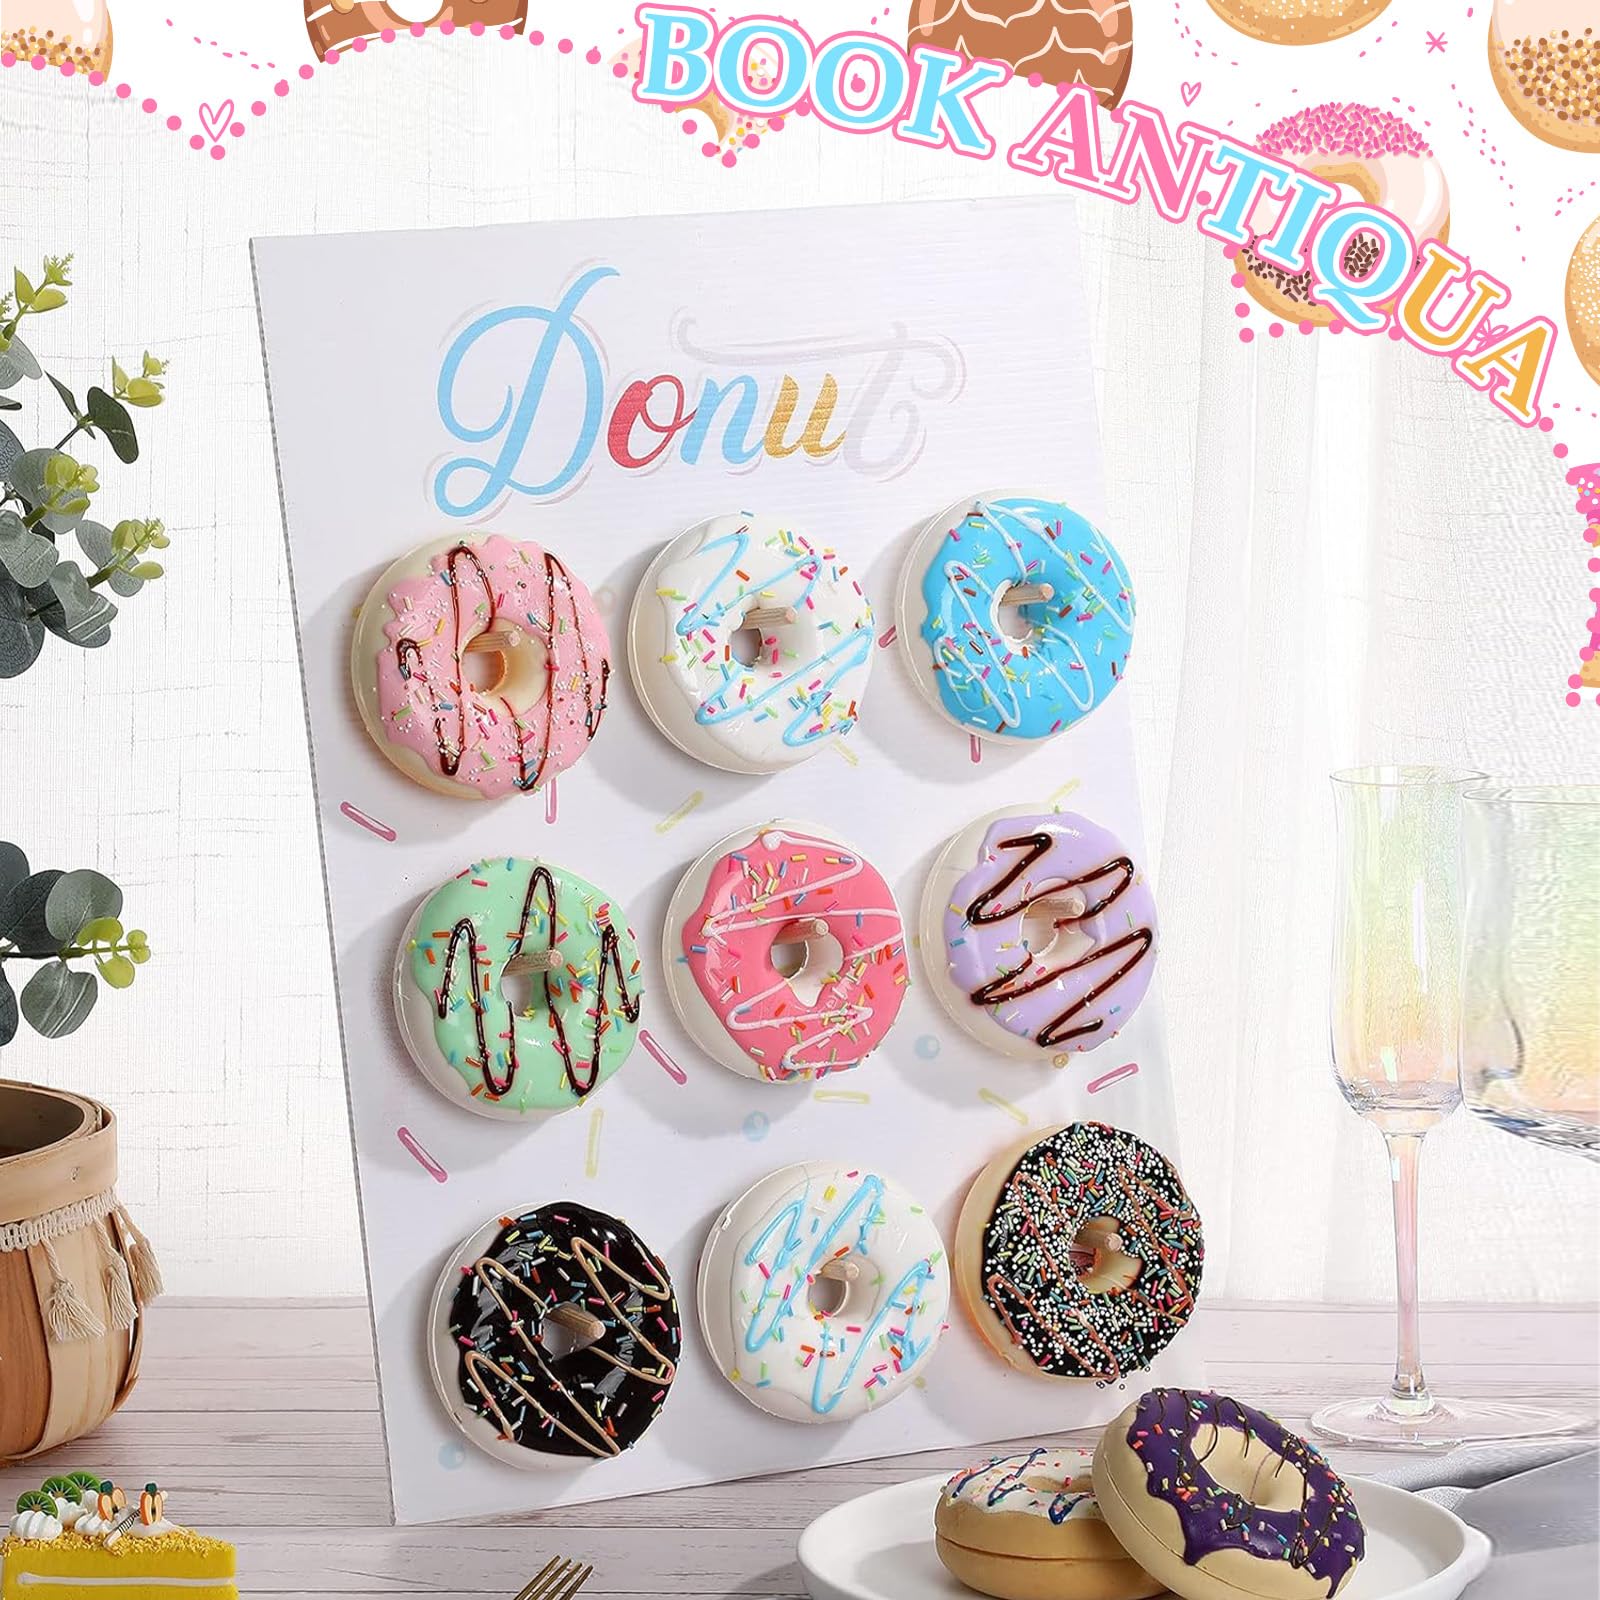 Wall Display Stand Reusable Donut Holder Board with Rustic Wood for Party Decorations Supplies Dessert Table at Wedding Birthday Baby Shower Treat (White)